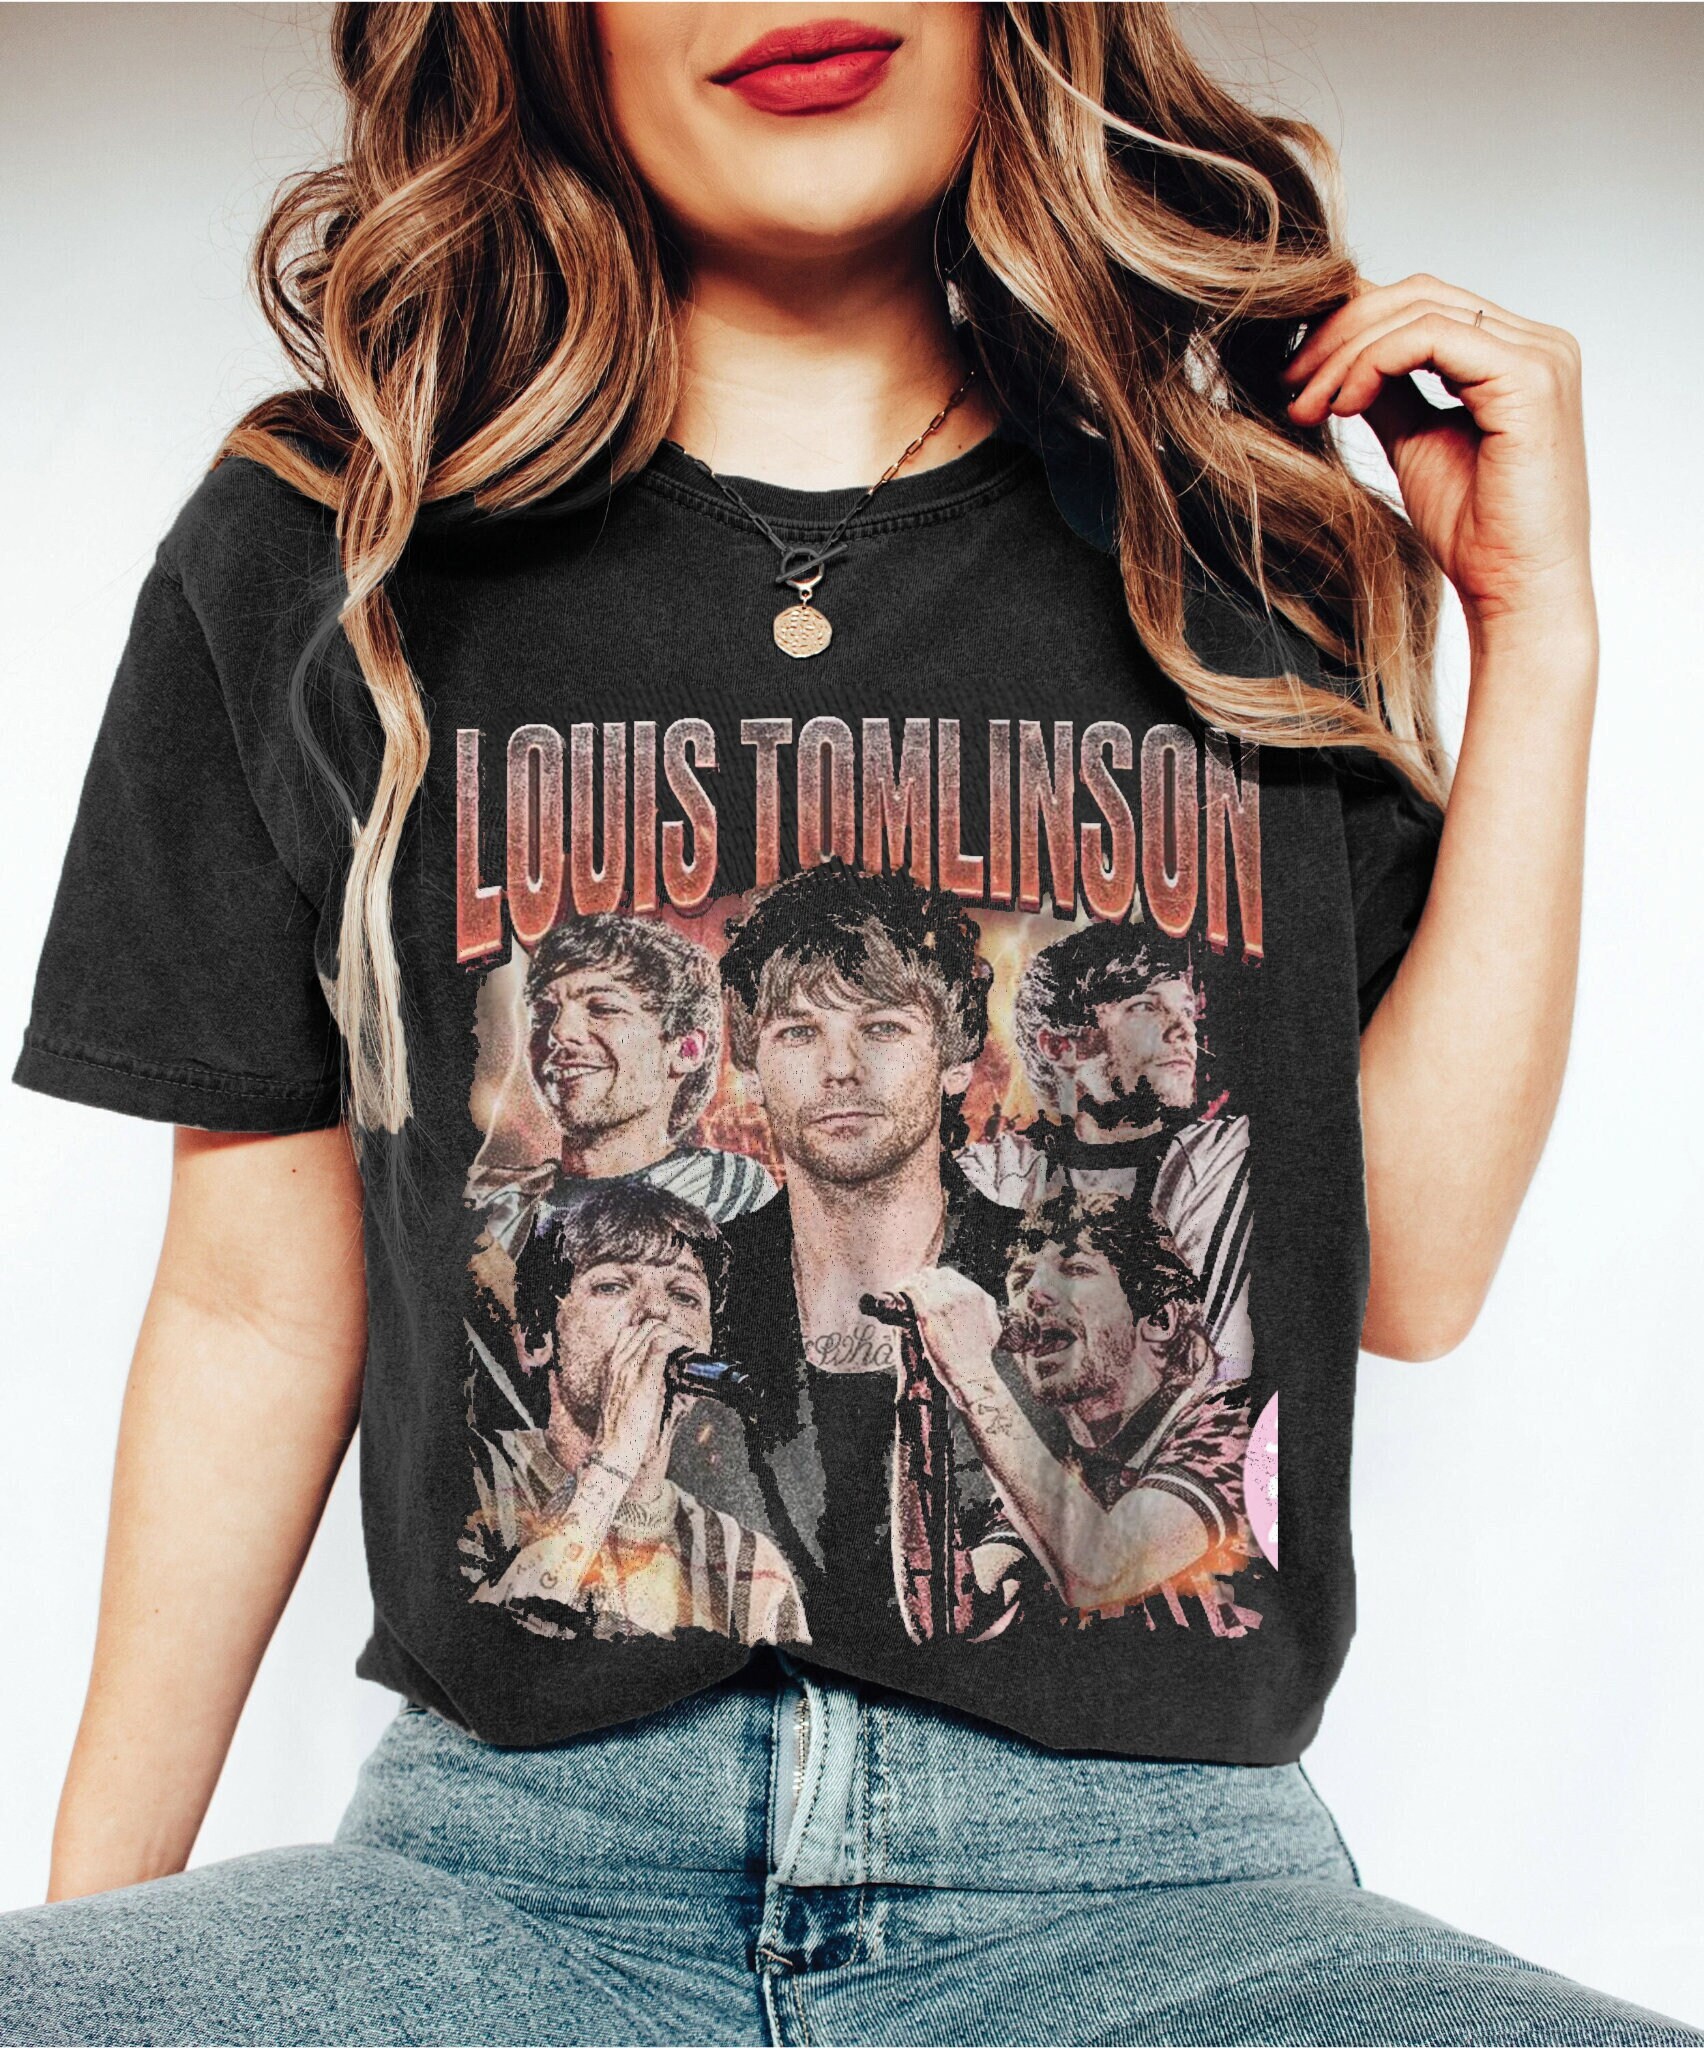 Louis Tomlinson Merch One Direction T-Shirt - Walls, The Tommo Way, Graphic  Tee